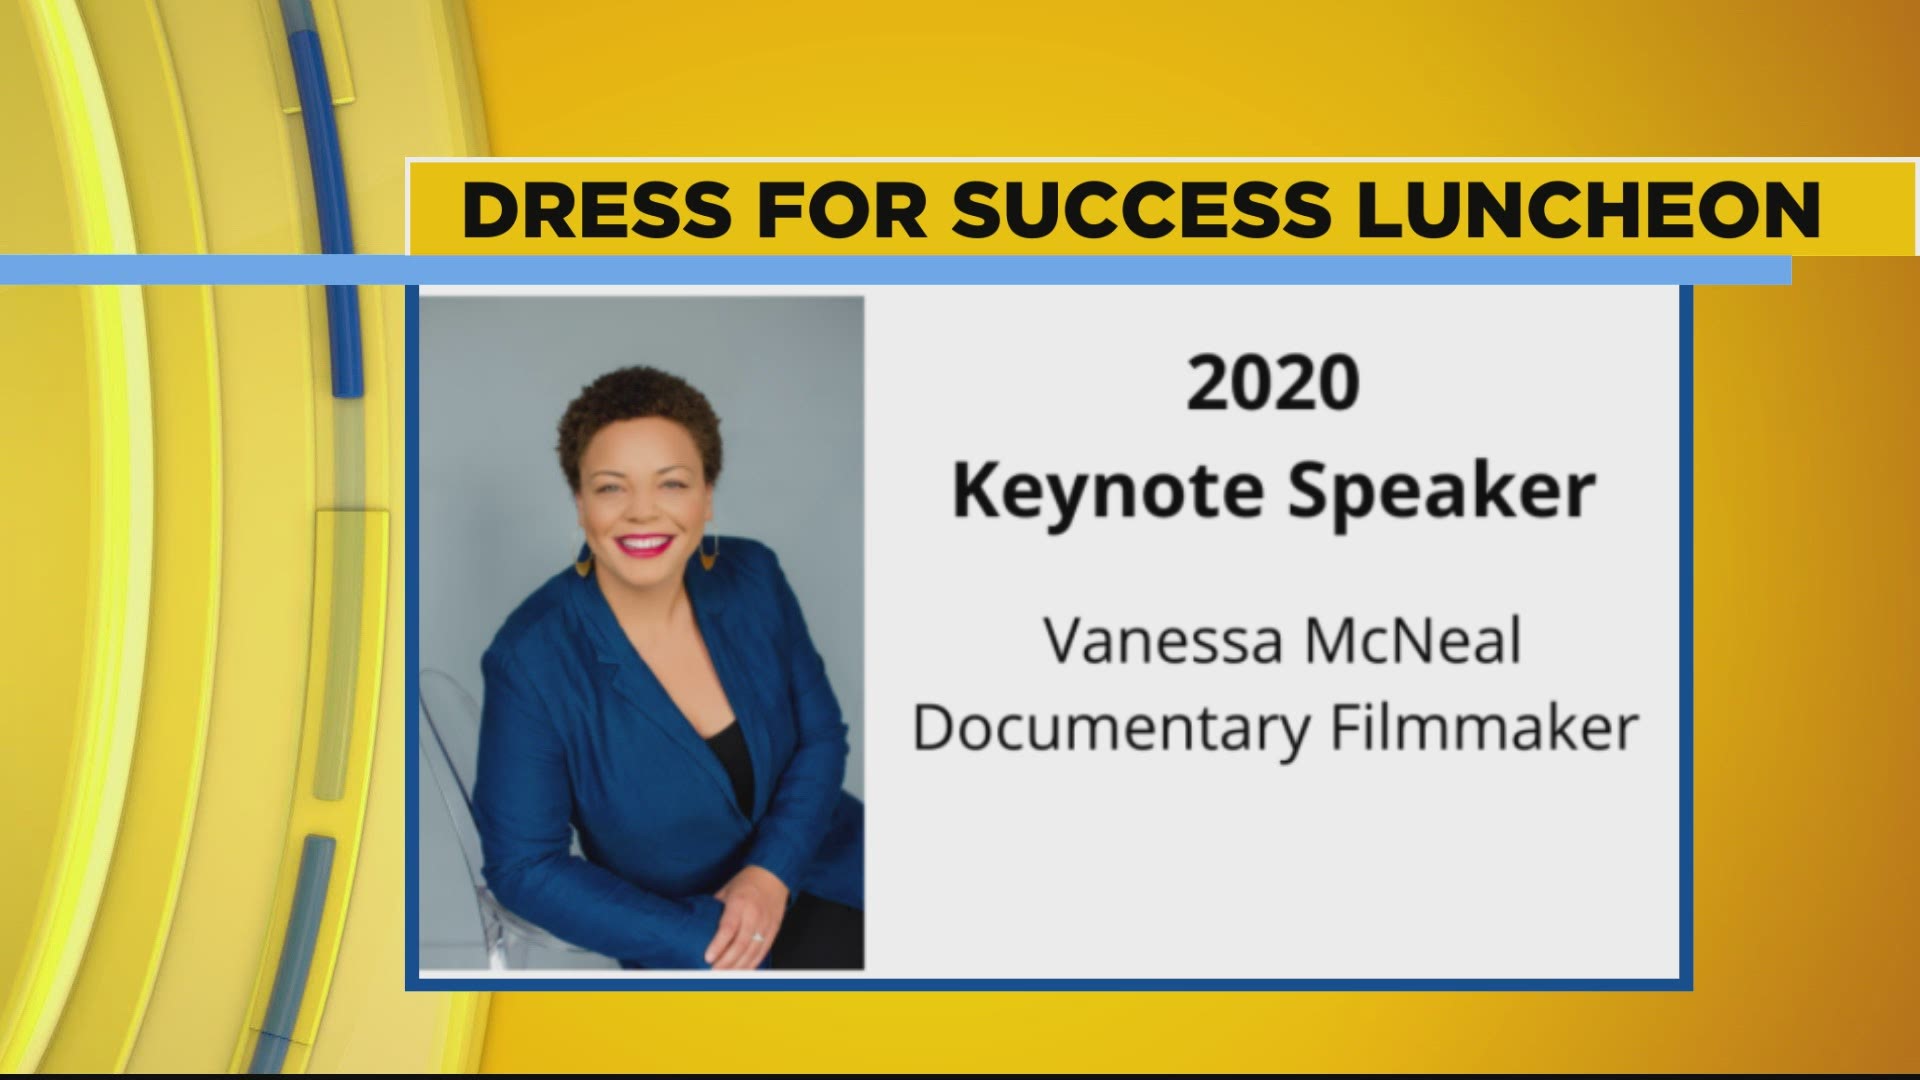 Lou talks with the Executive Director of Dress for Less about today's luncheon